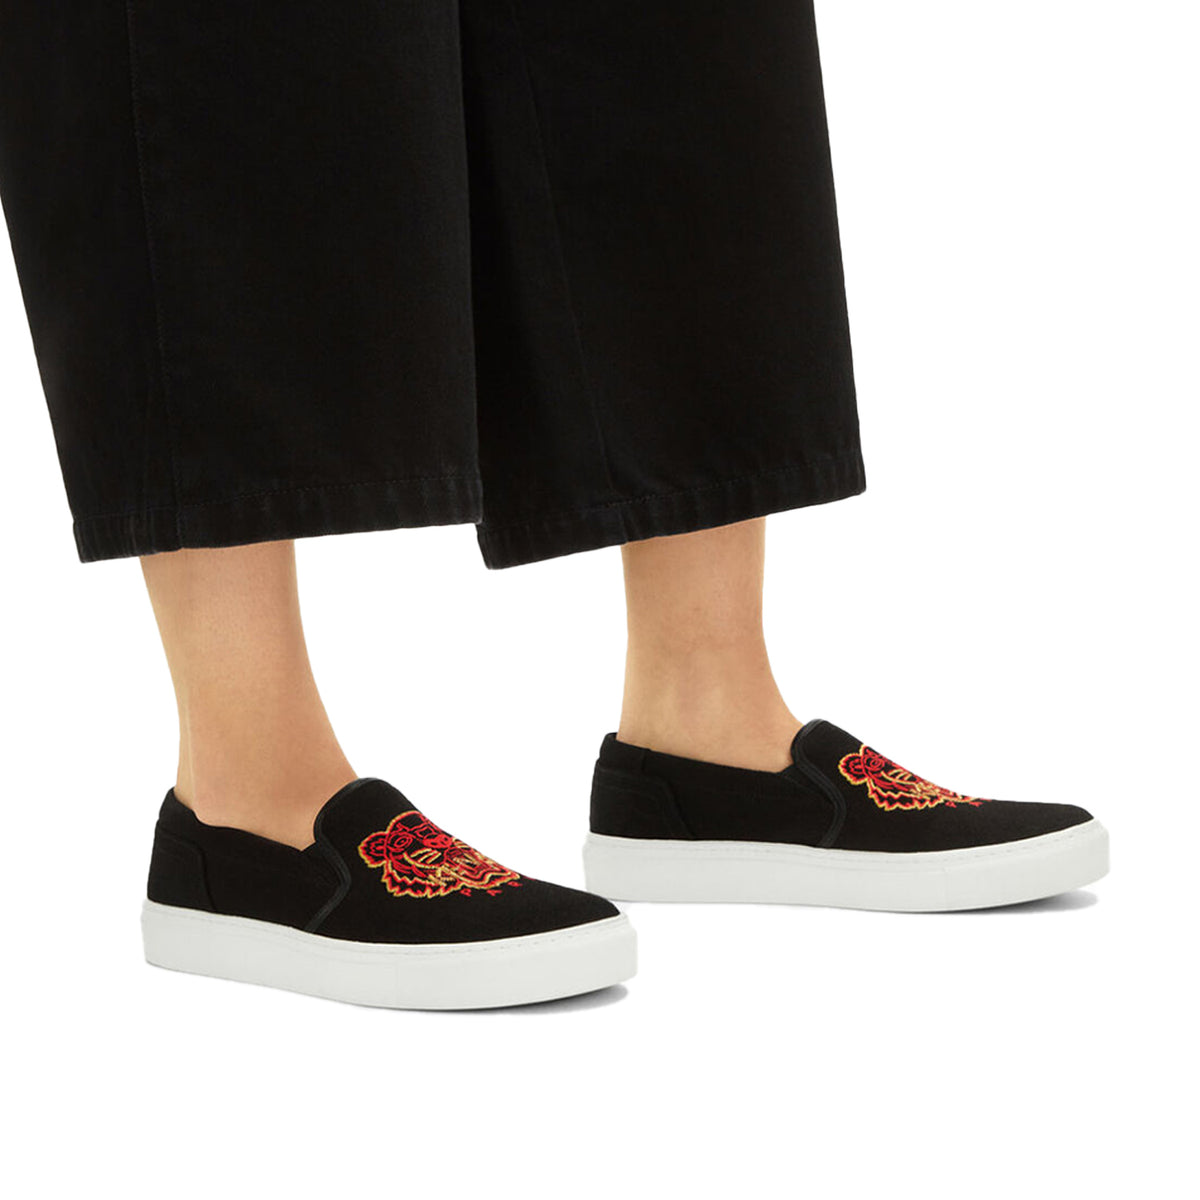 Kenzo Women's 'Year of The Tiger' K-Skate No Lace Sneaker